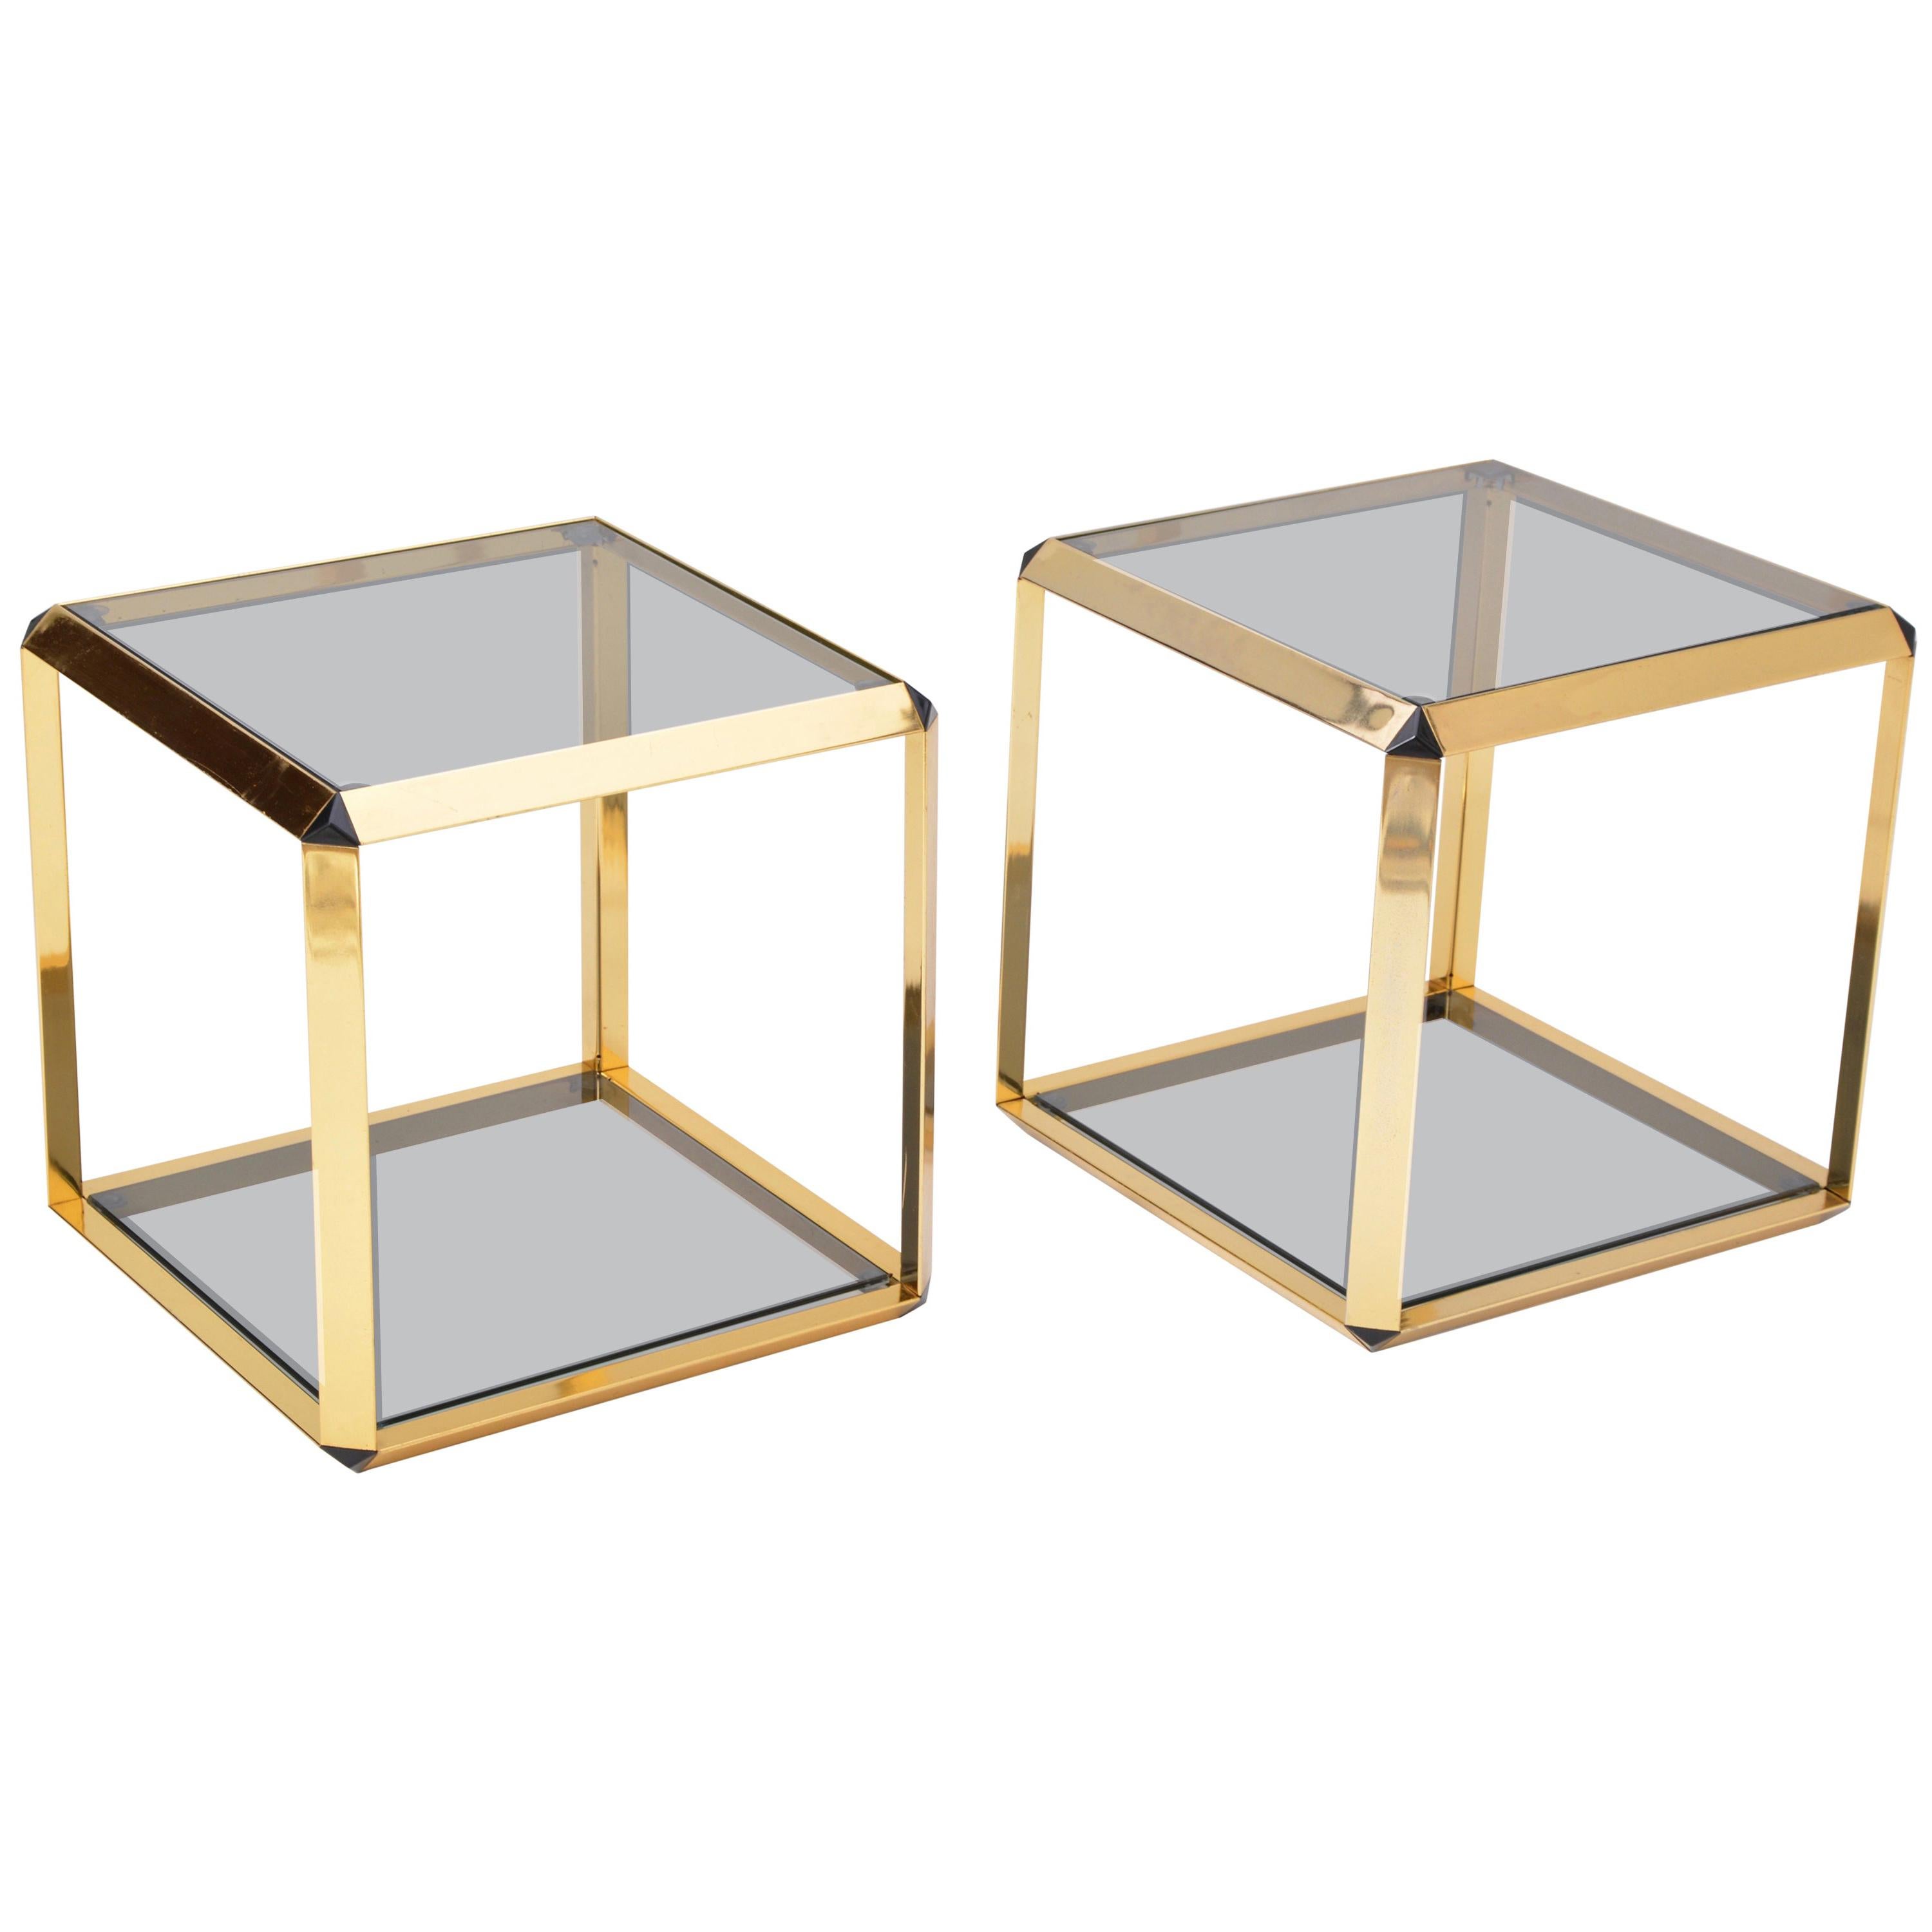 Pair of Mid-Century Modern Italian Gold-Rimmed Metal and Glass Side Tables